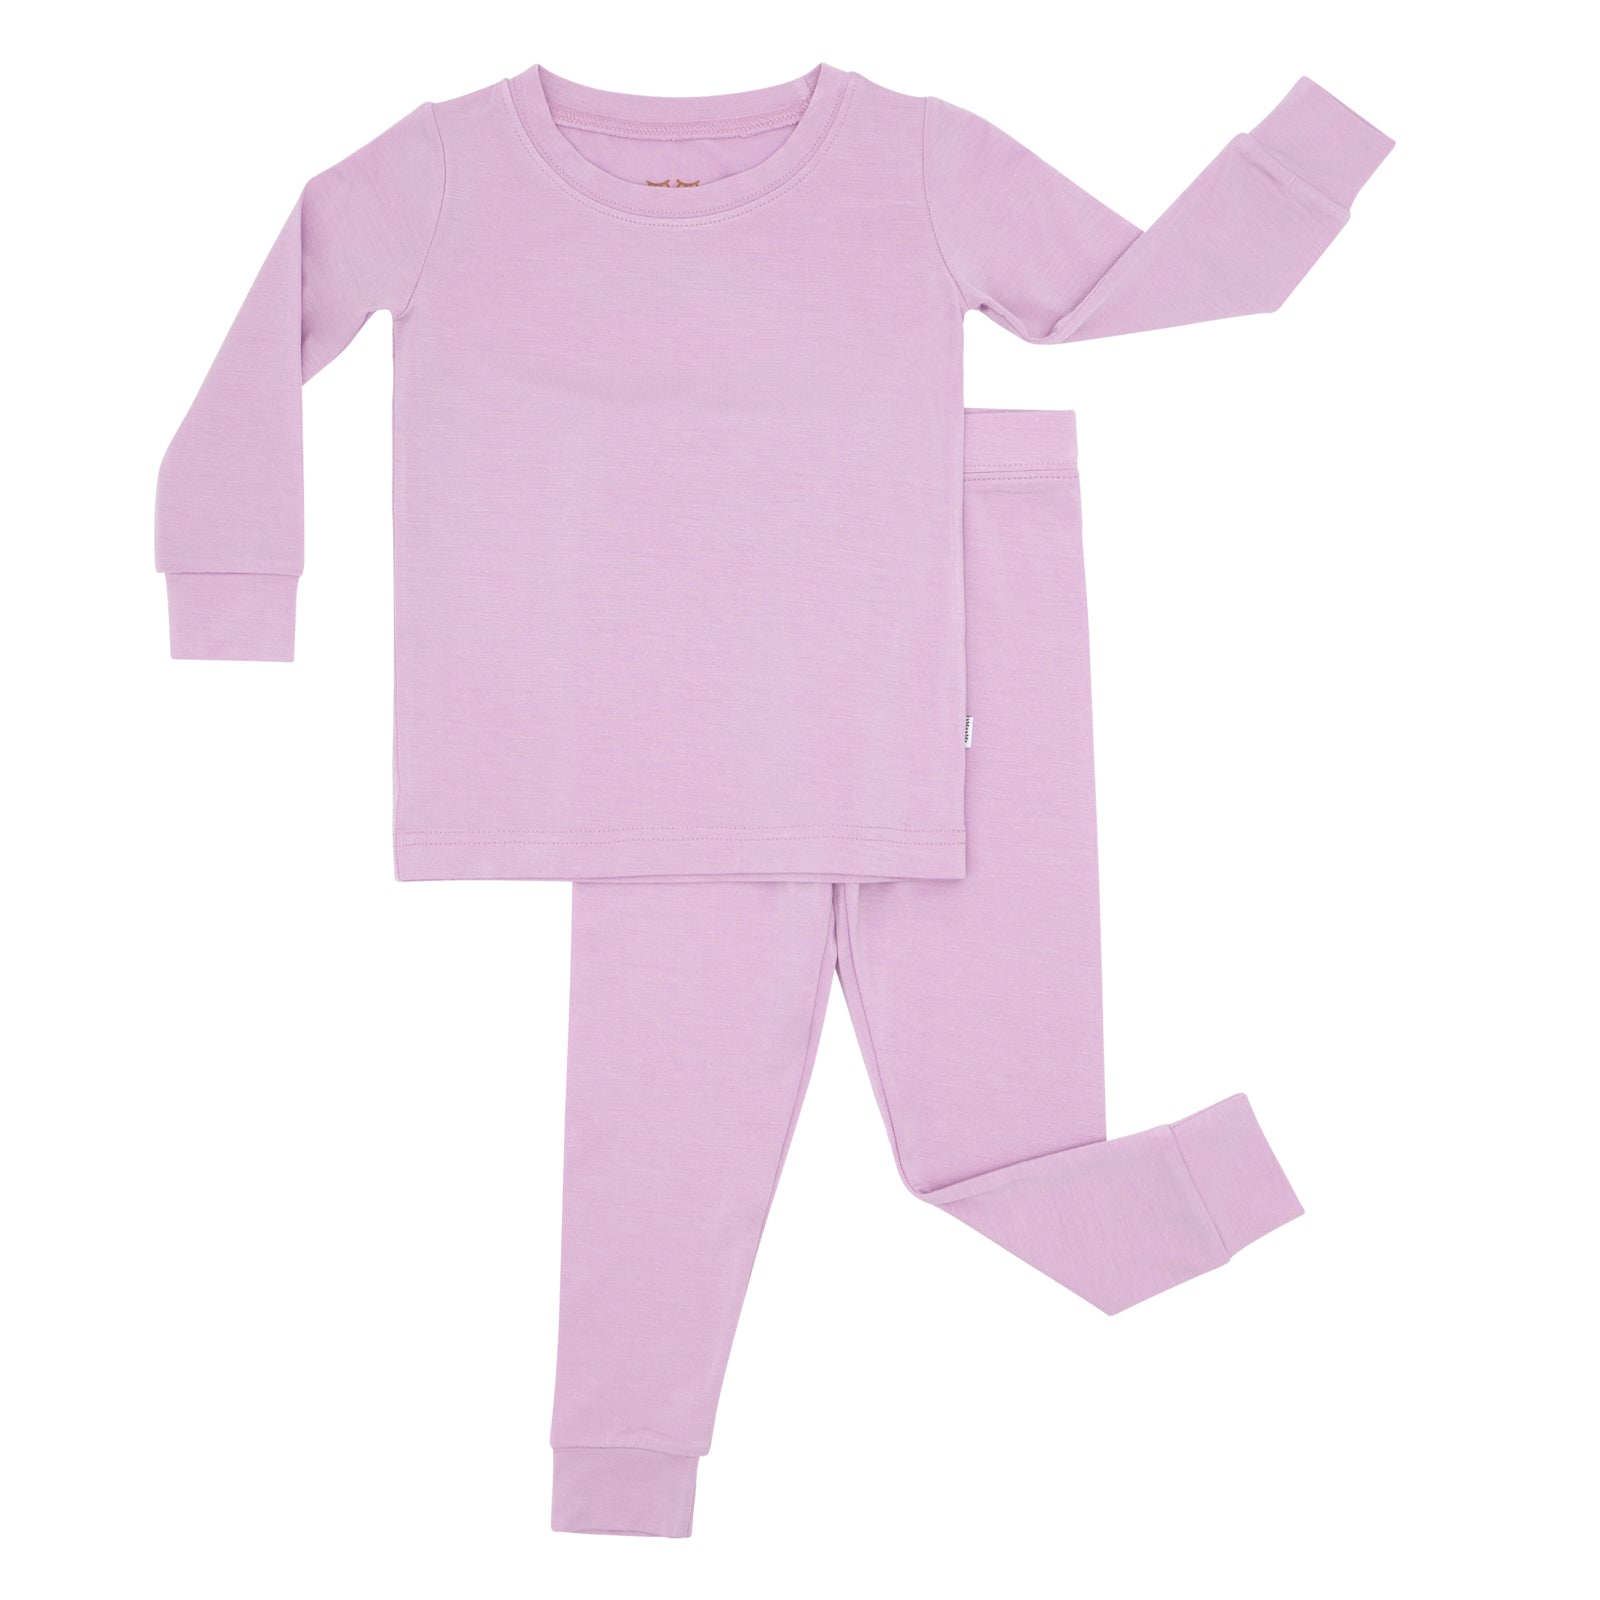 Flat lay image of a Light Orchid two piece pajama set